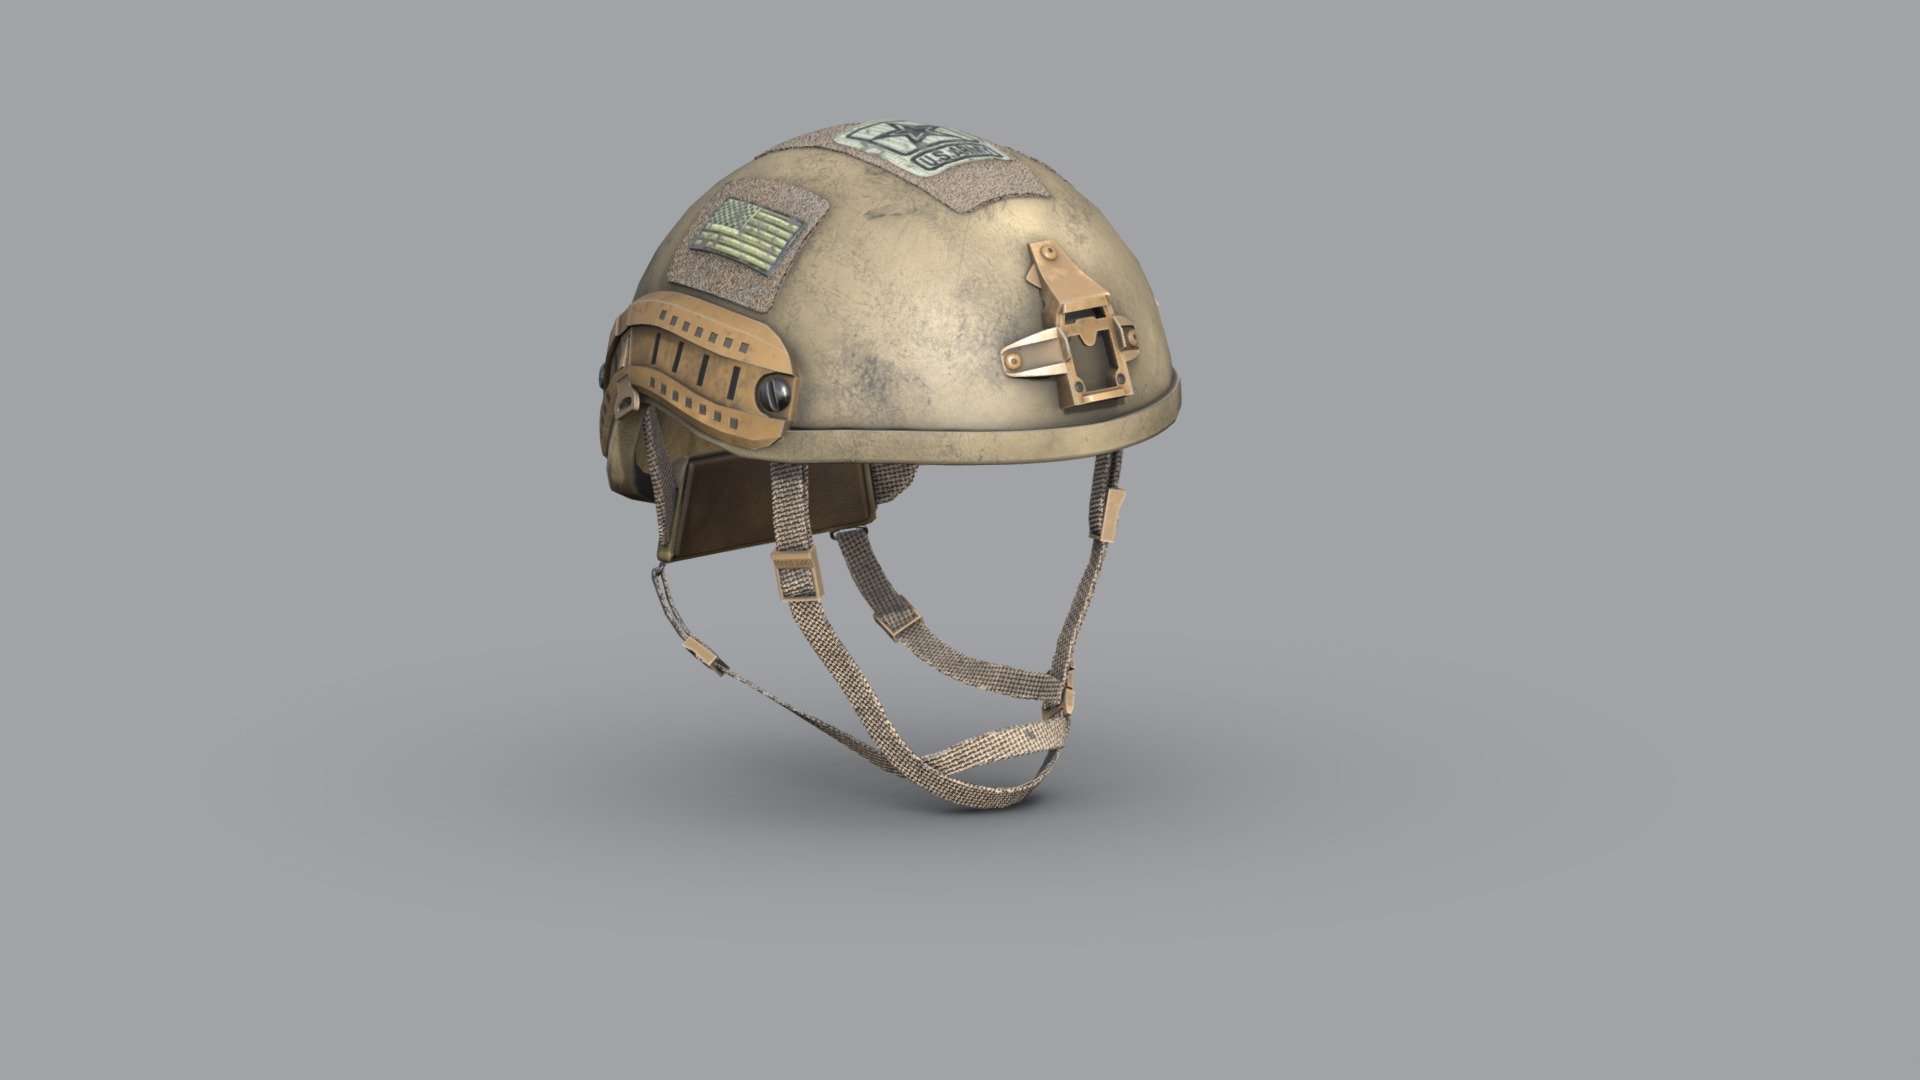 Helmet USA. PBR Low poly game ready

&mdash; General information &mdash; - Lowpoly, optimized for modern game engines 3d model